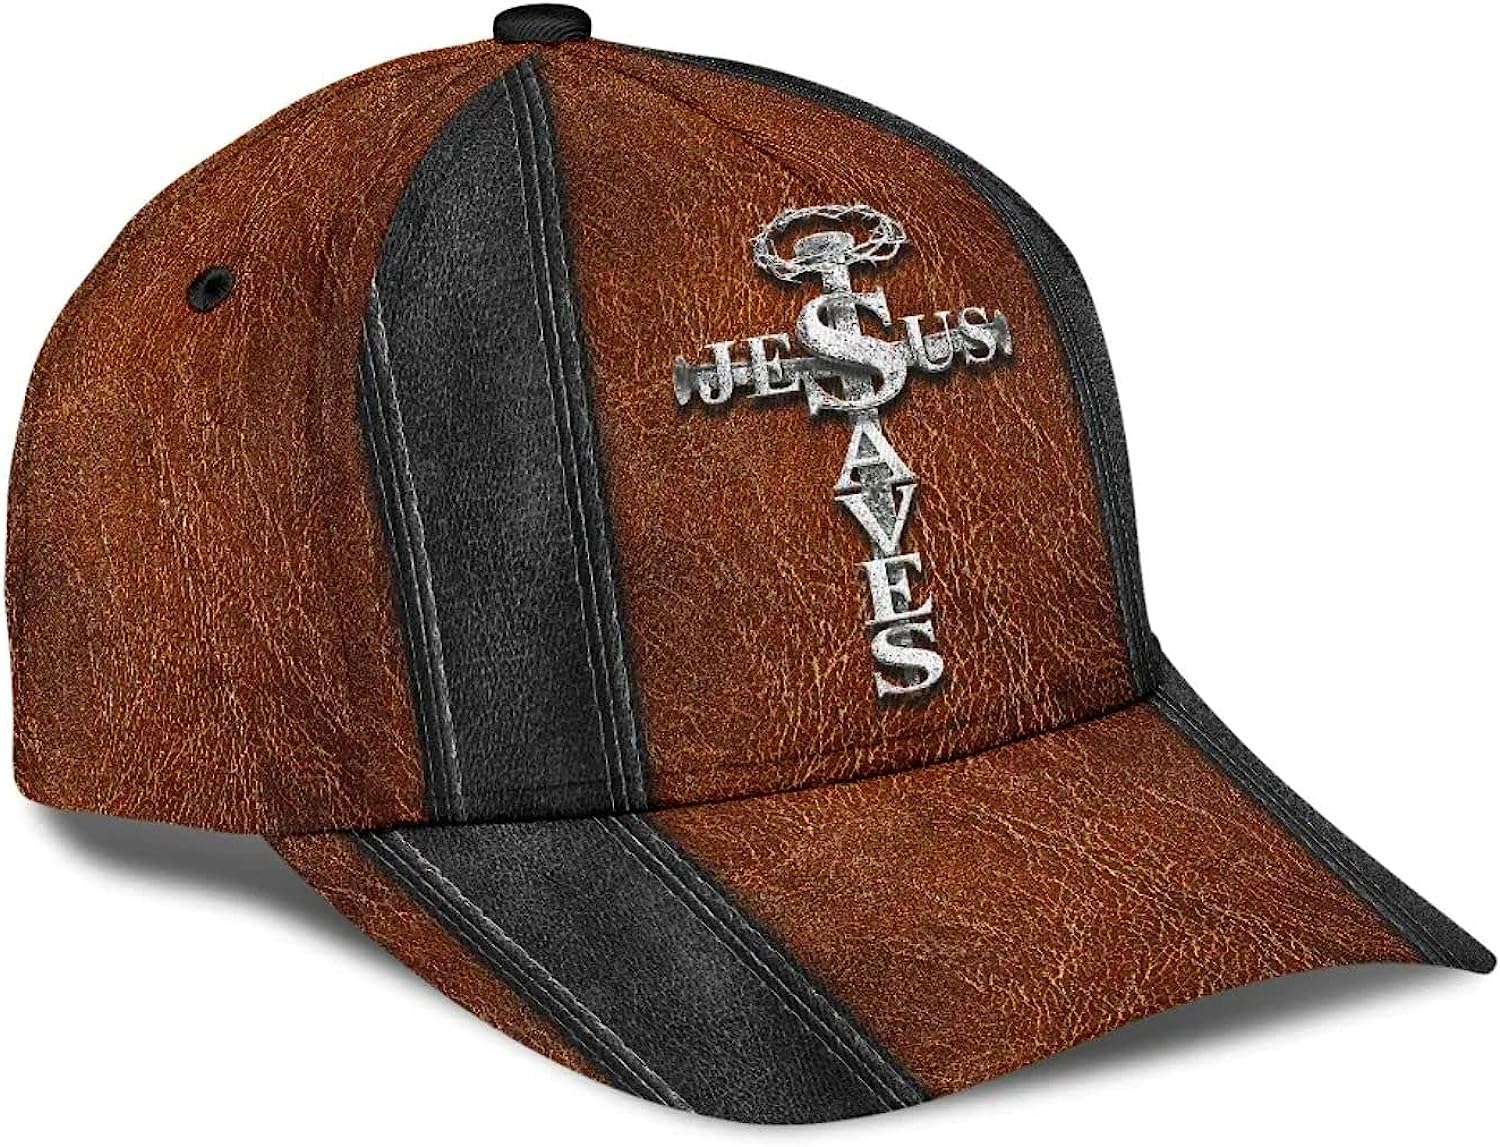 Jesus Saves Nail Cross Classic Hat All Over Print - Christian Hats for Men and Women